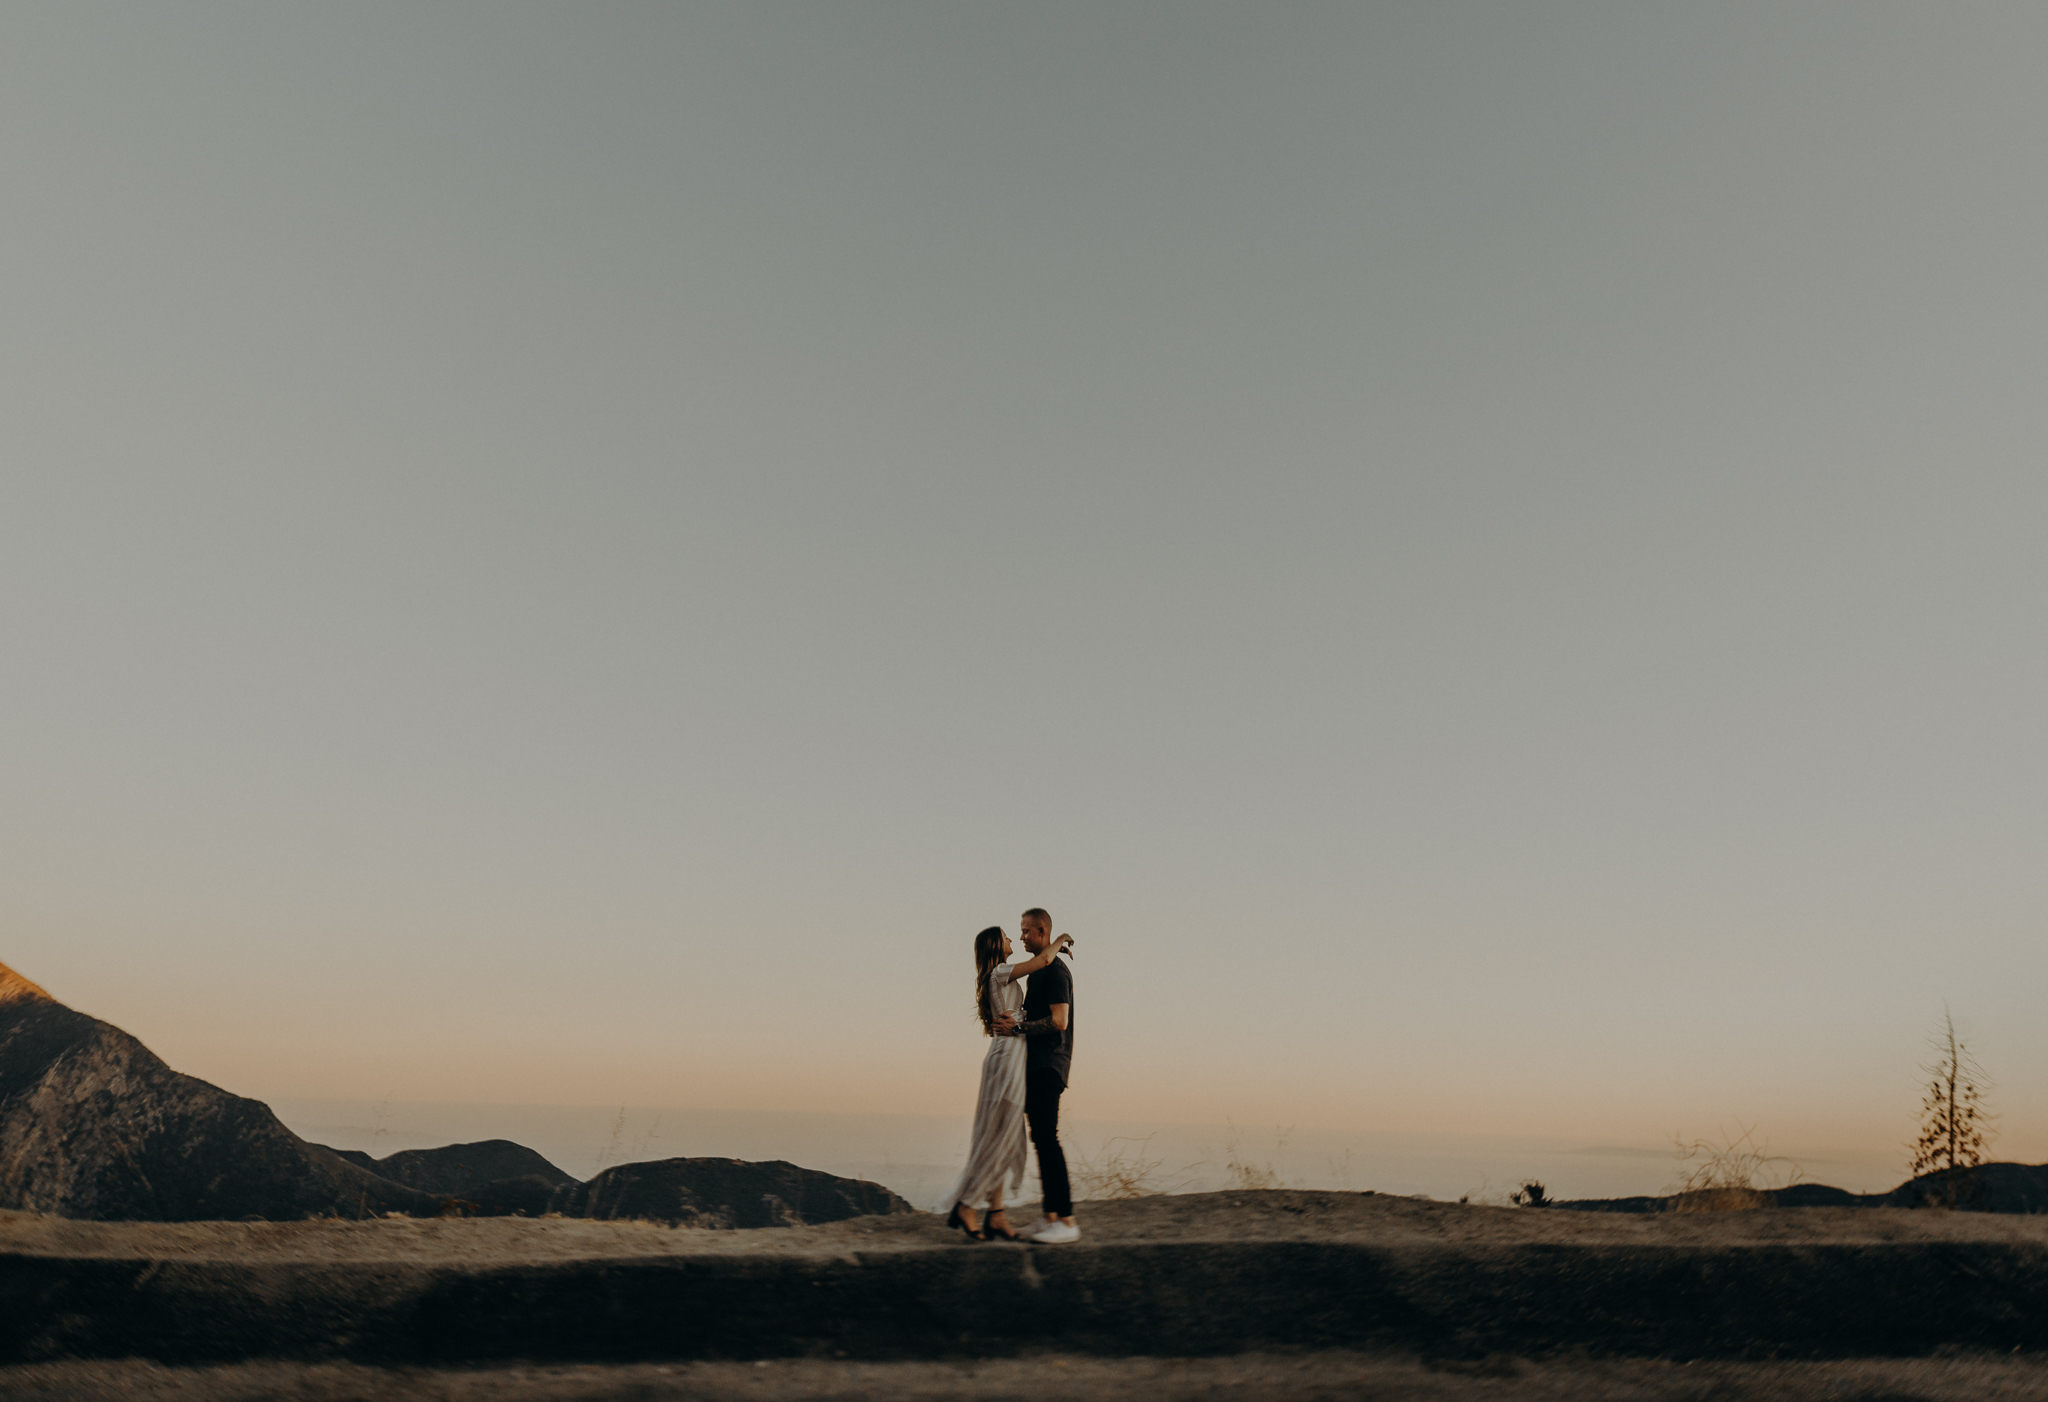 Isaiah + Taylor Photography - Los Angeles Forest Engagement Session - Laid back wedding photographer-009.jpg